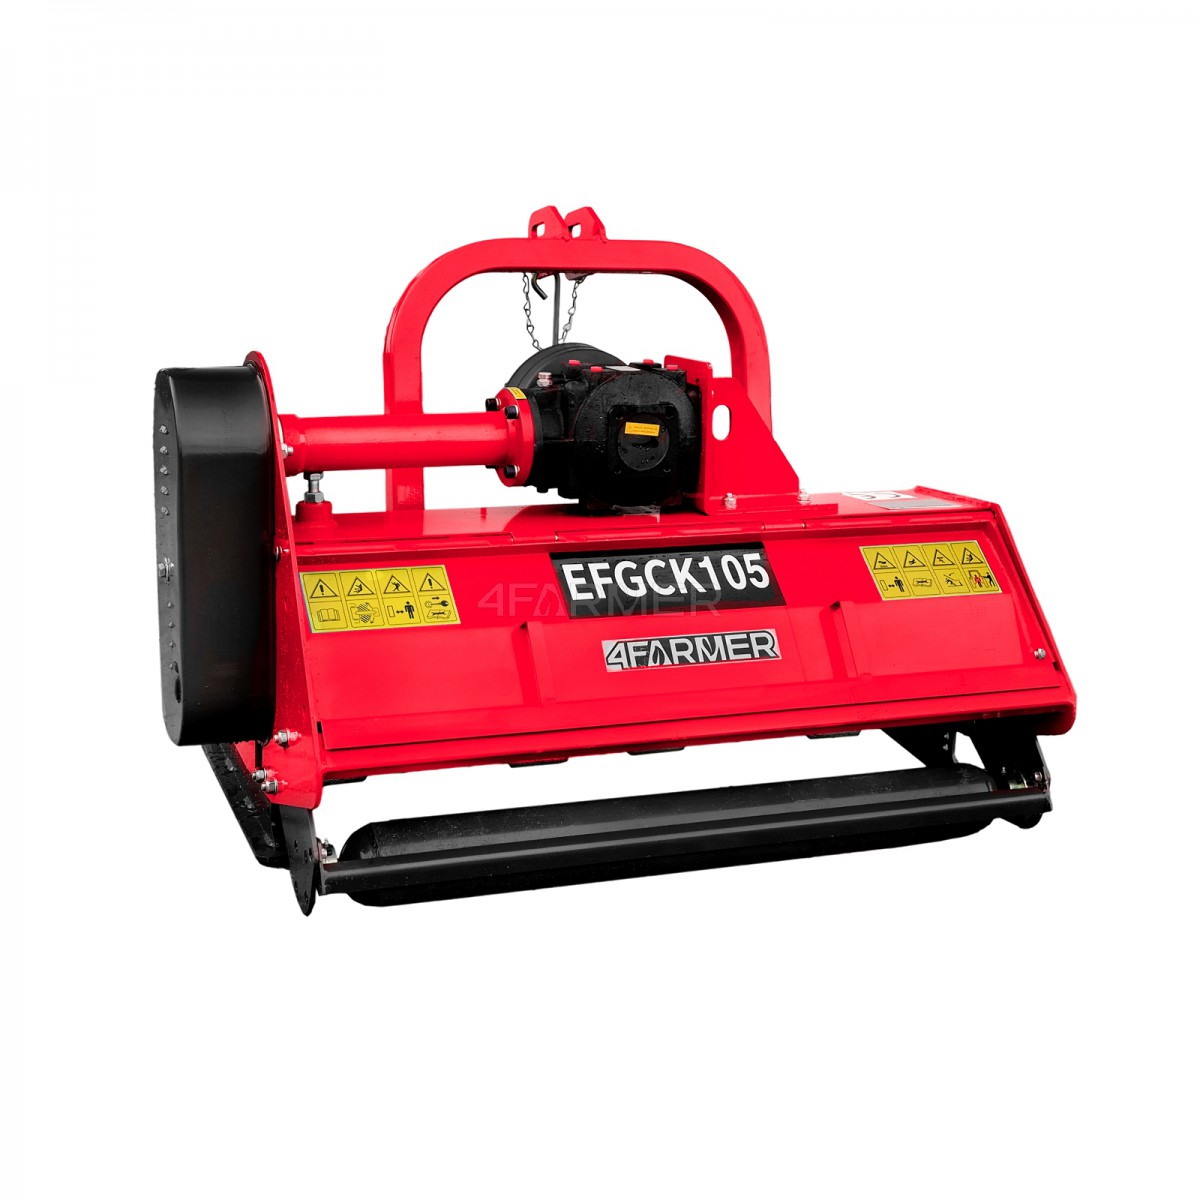 Flail mower EFGC-K 115, 4FARMER opening hatch - red